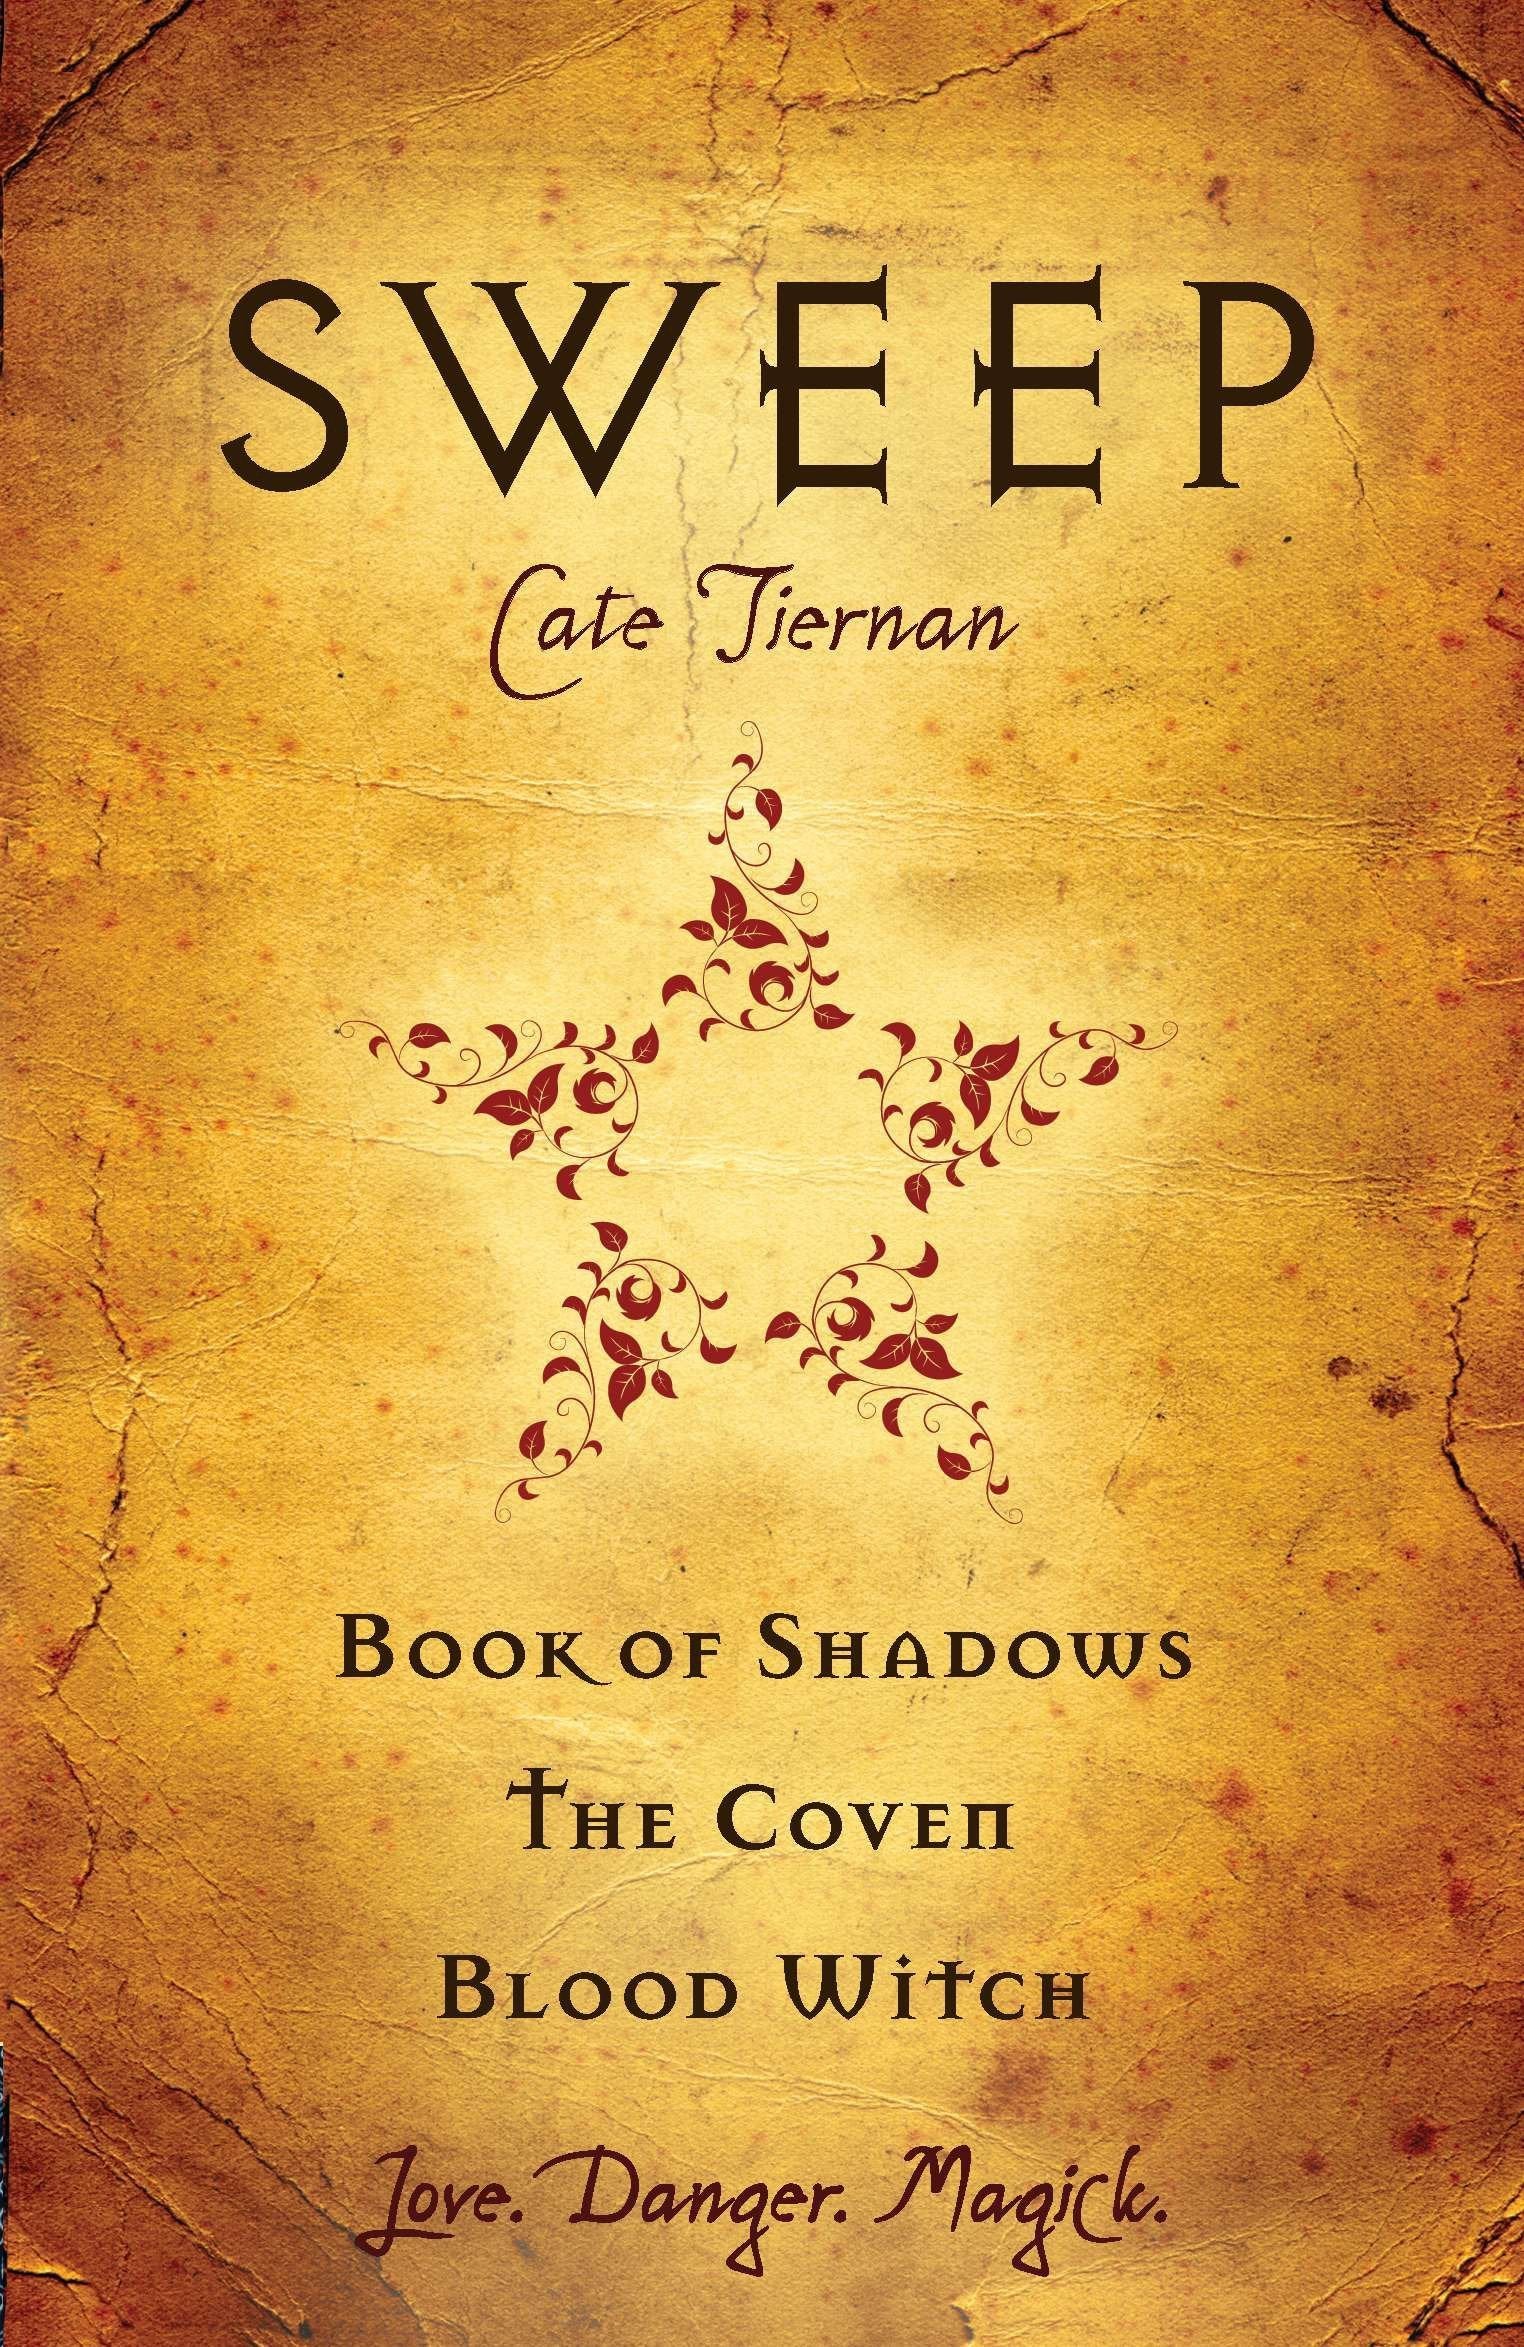 The Sweep Series by Cate Tiernan- Review by Ridley Reads